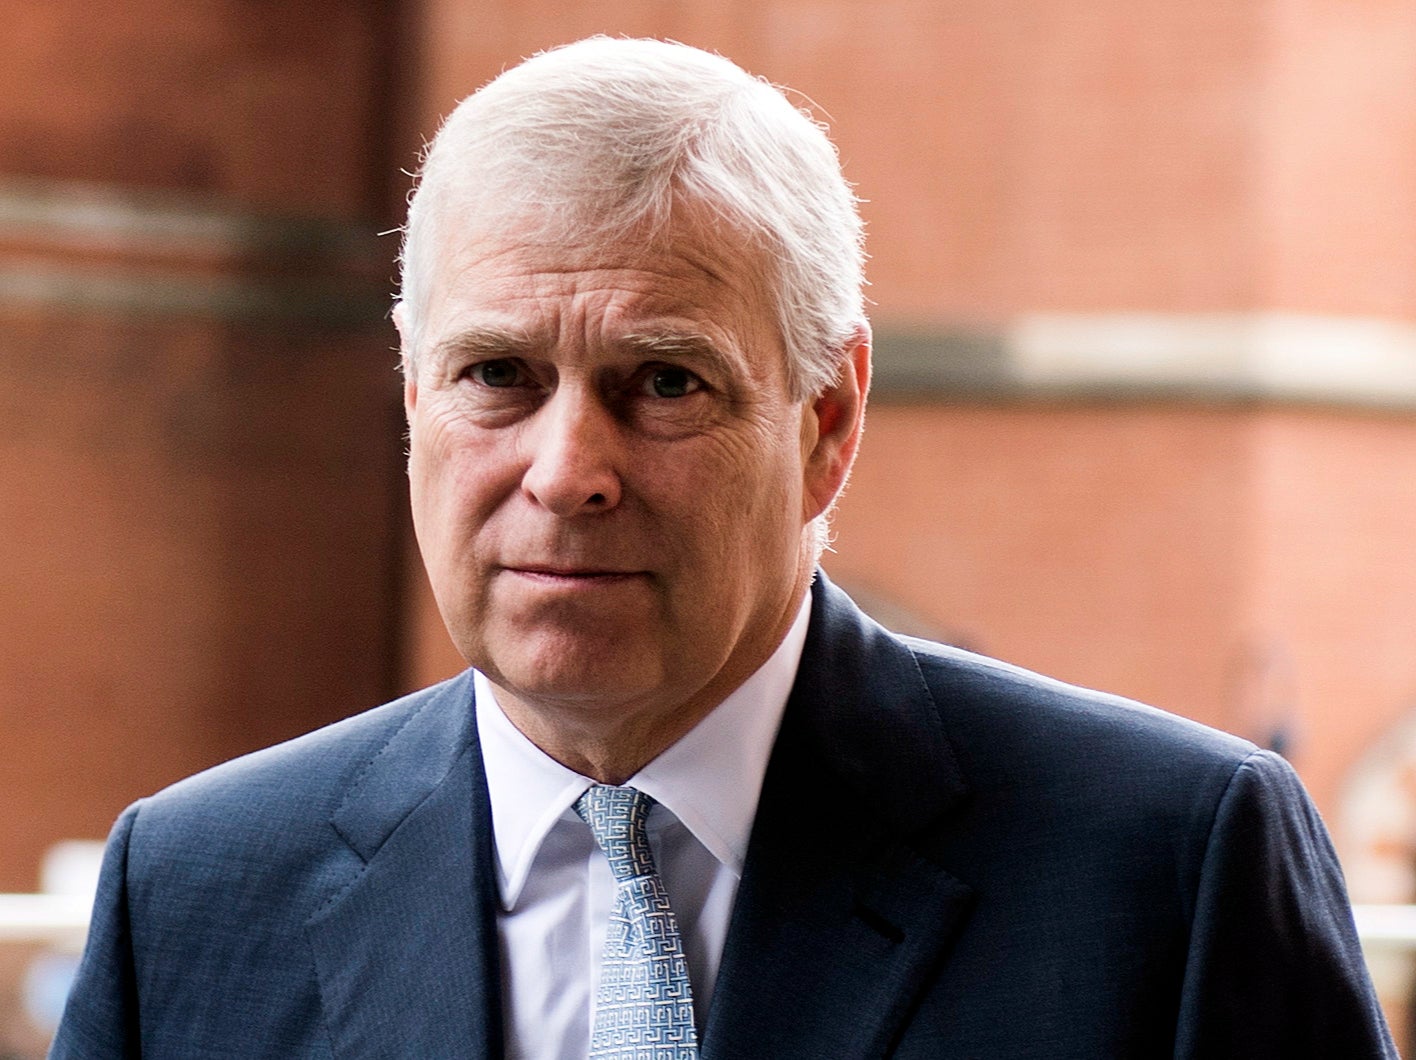 Prince Andrew has avoided a public trial over sex abuse allegations after reaching an out-of-court settlement